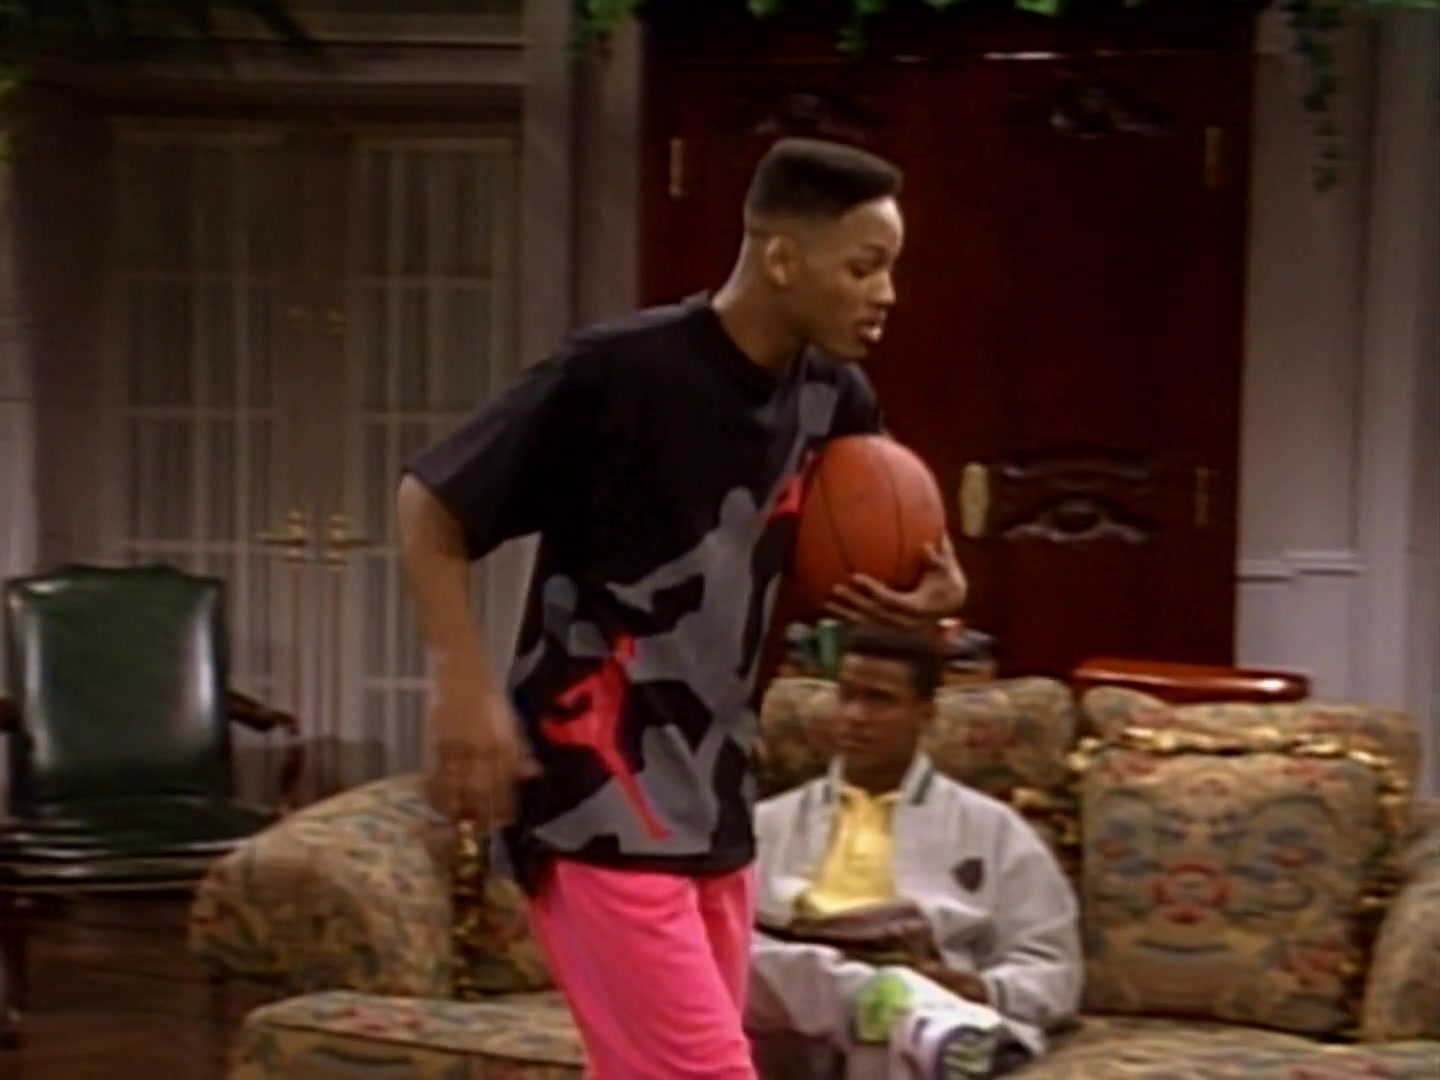 Nike Jordan Print T-Shirt Worn By Will Smith In The Fresh Of Bel-Air S01E11 "Courting